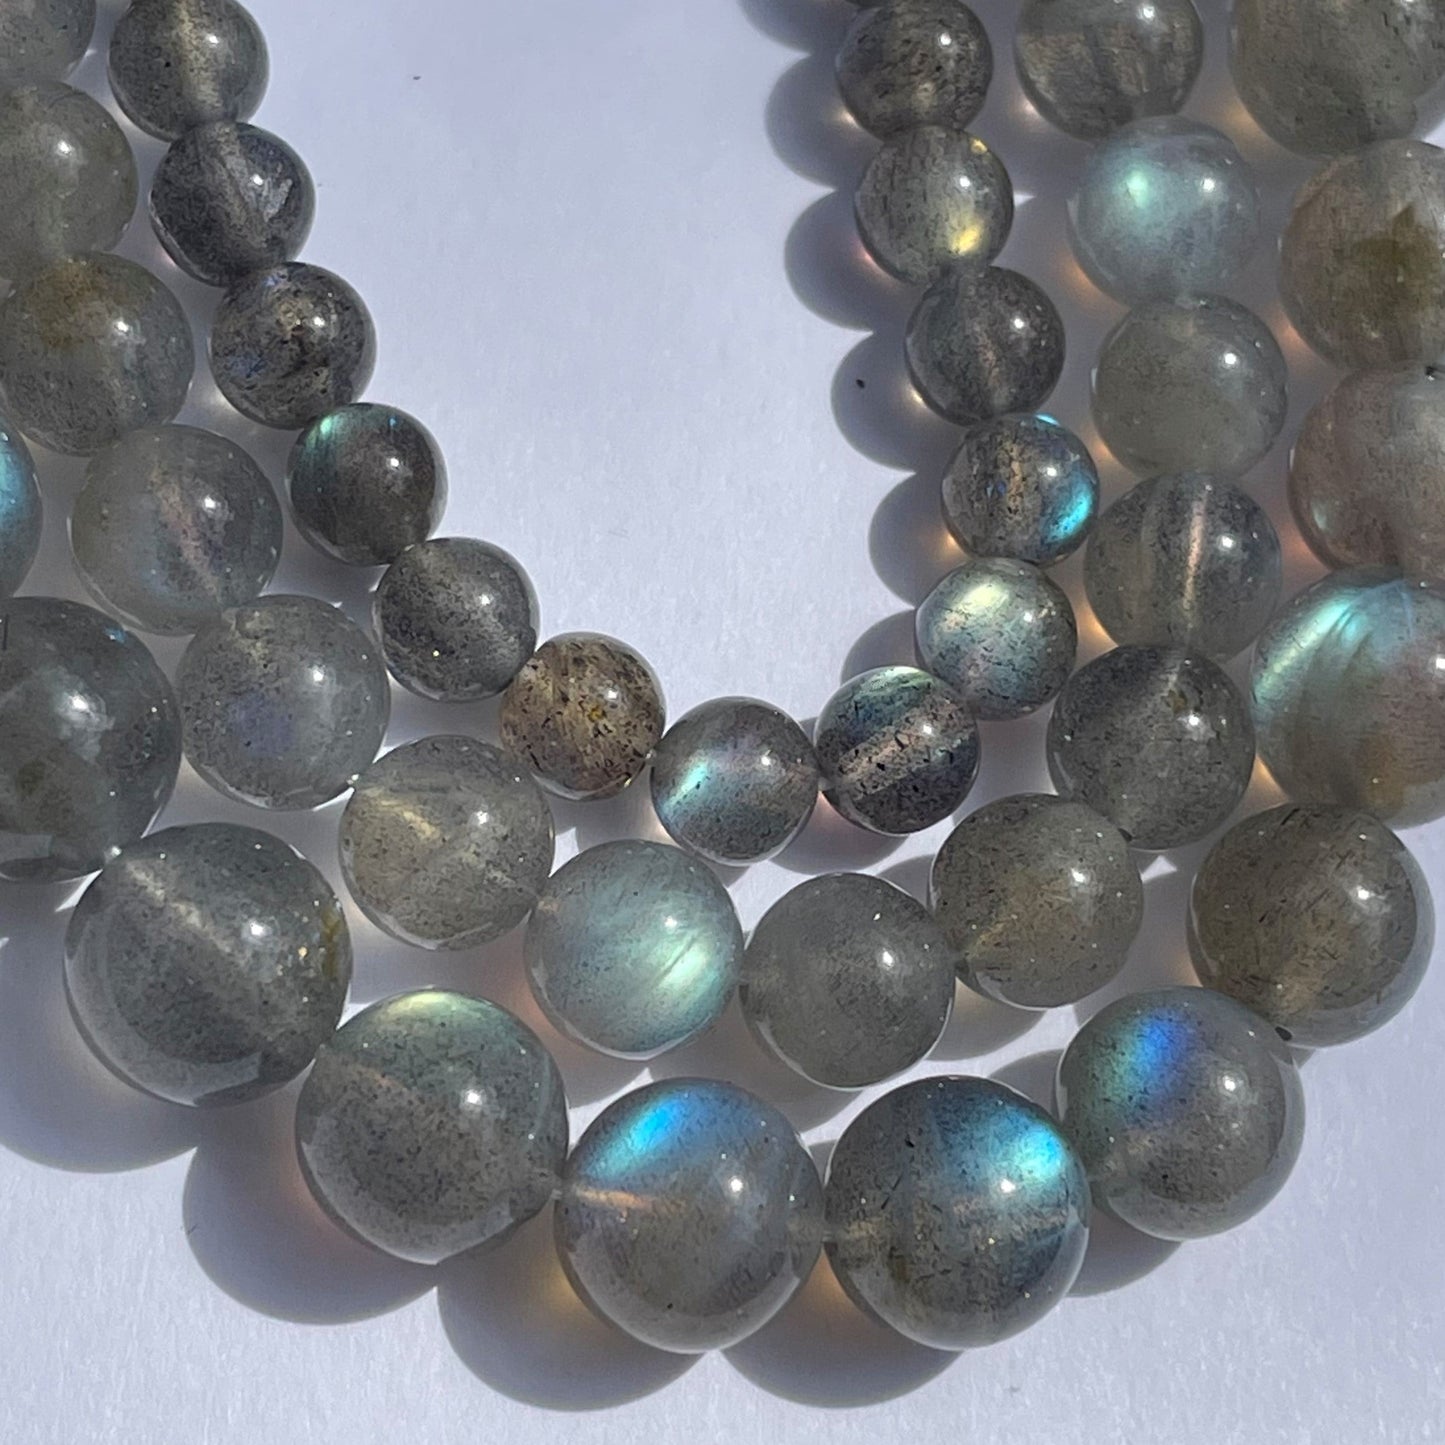 Crystal healing Labradorite necklace known for energy protection